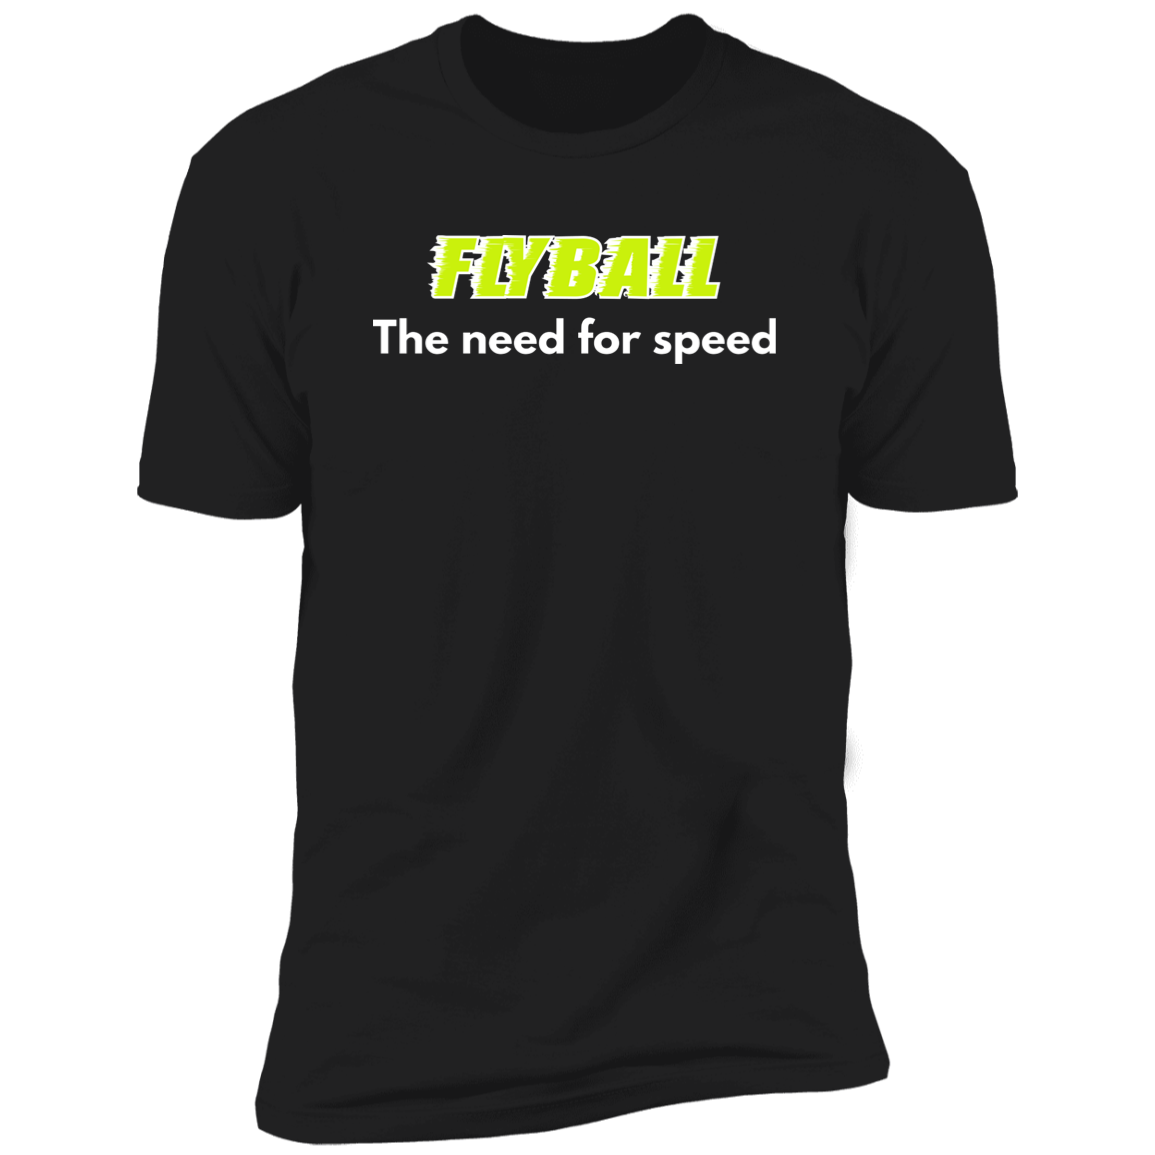 Flyball The Need For Speed dog shirt, dog shirt for humans, sporting dog shirt, in black 